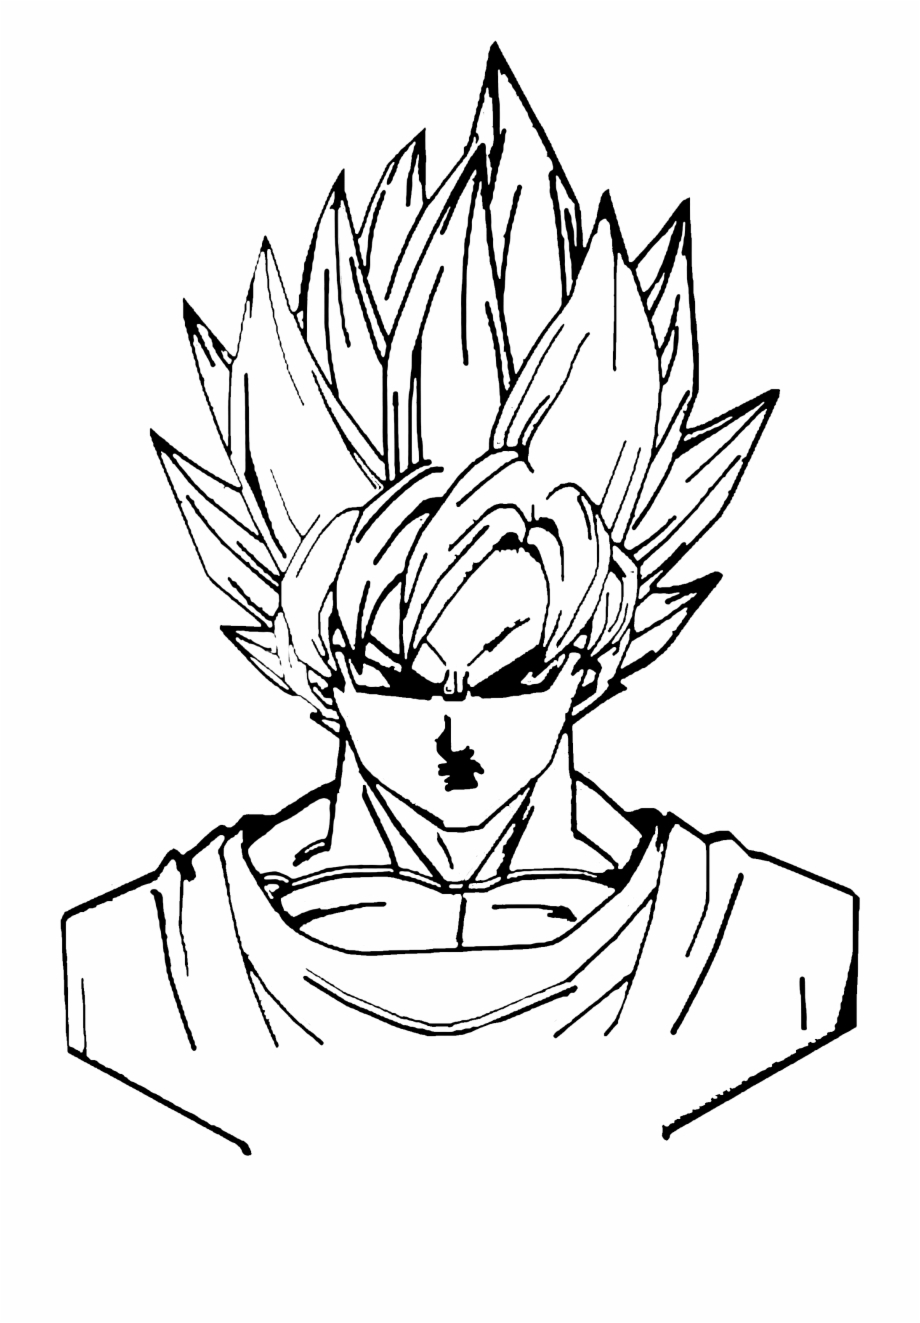 goku drawing in clipart
